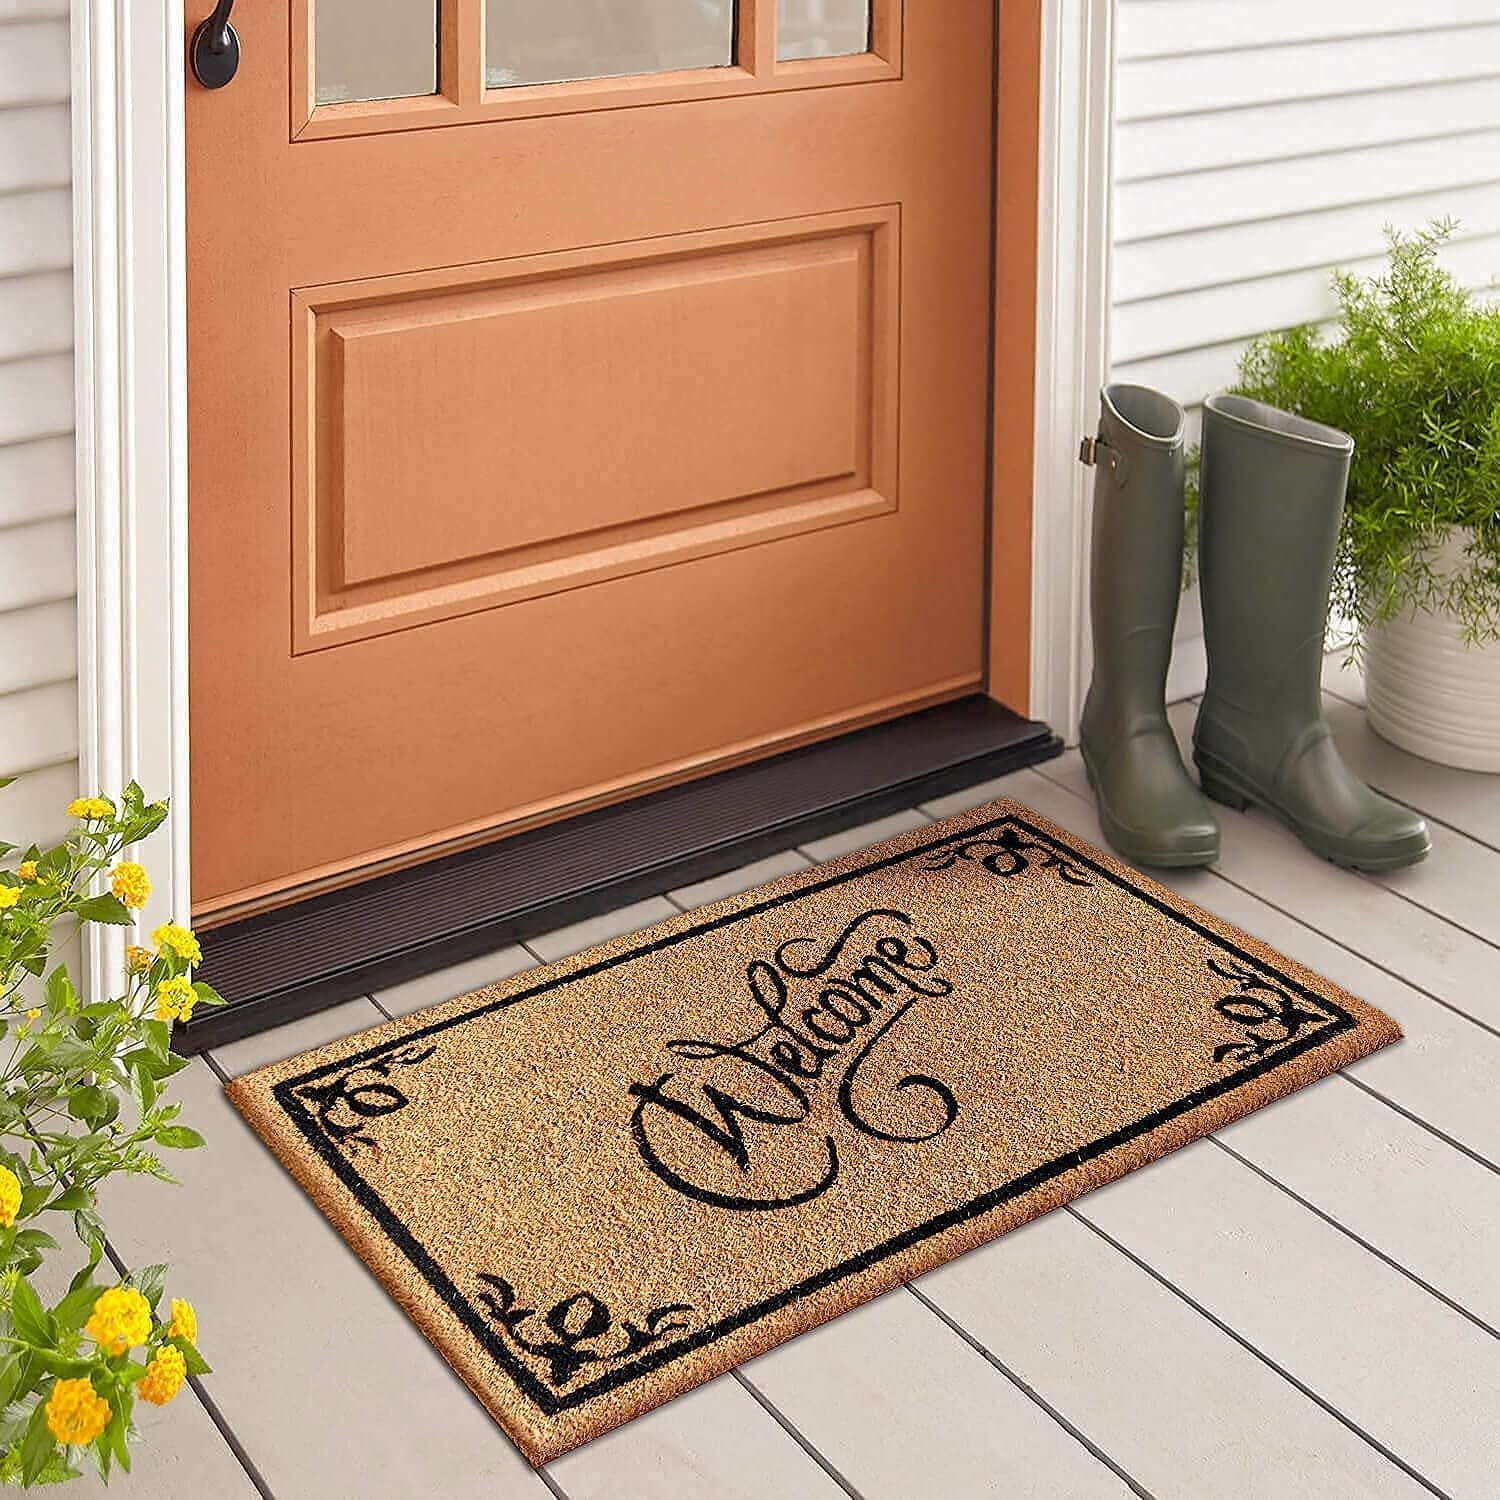 LuxUrux Welcome Mats Outdoor Coco Coir Doormat, with Heavy-Duty PVC Backing - Natural - Perfect Color/Sizing for Outdoor/Indoor uses.,30 x 17.